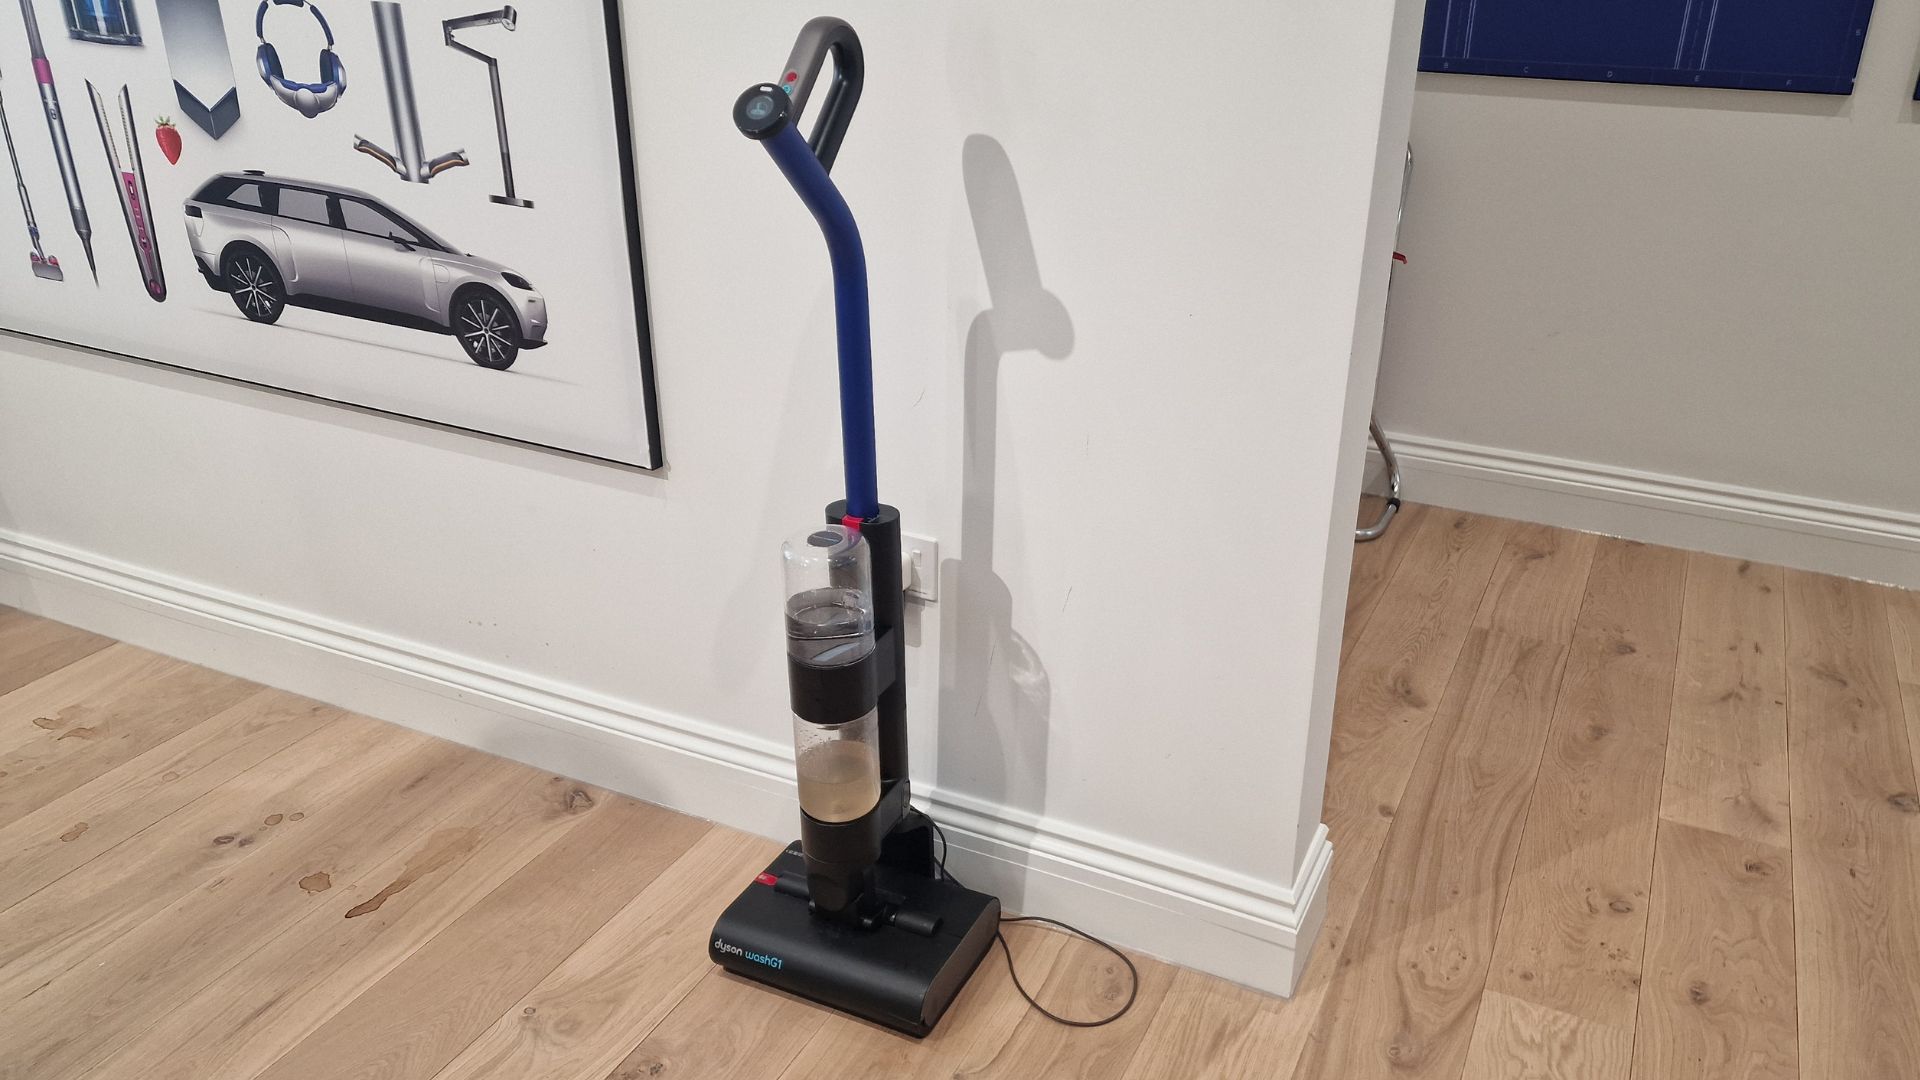 The Dyson WashG1 against a wall in its stand